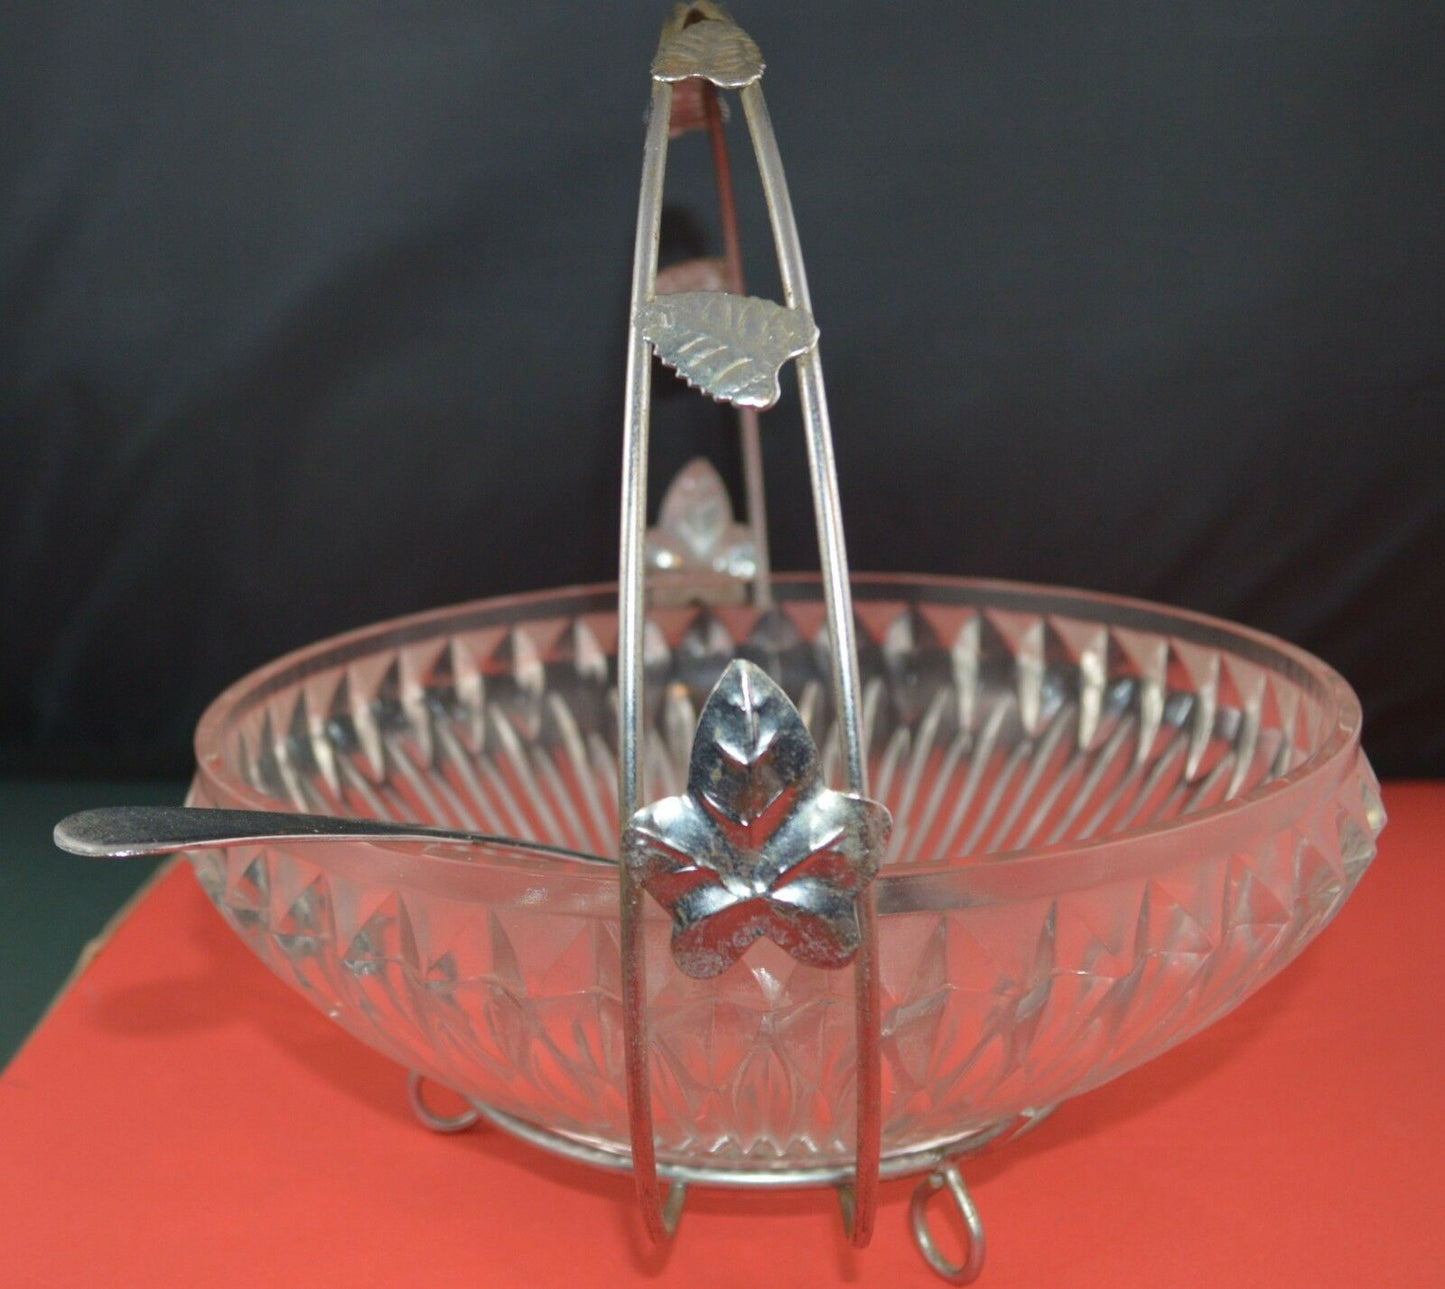 CUT GLASS VASE CUT GLASS SERVER WITH METAL HOLDER CUT GLASS SMALL DISH(PREVIOUSLY OWNED) GOOD CONDITION - TMD167207